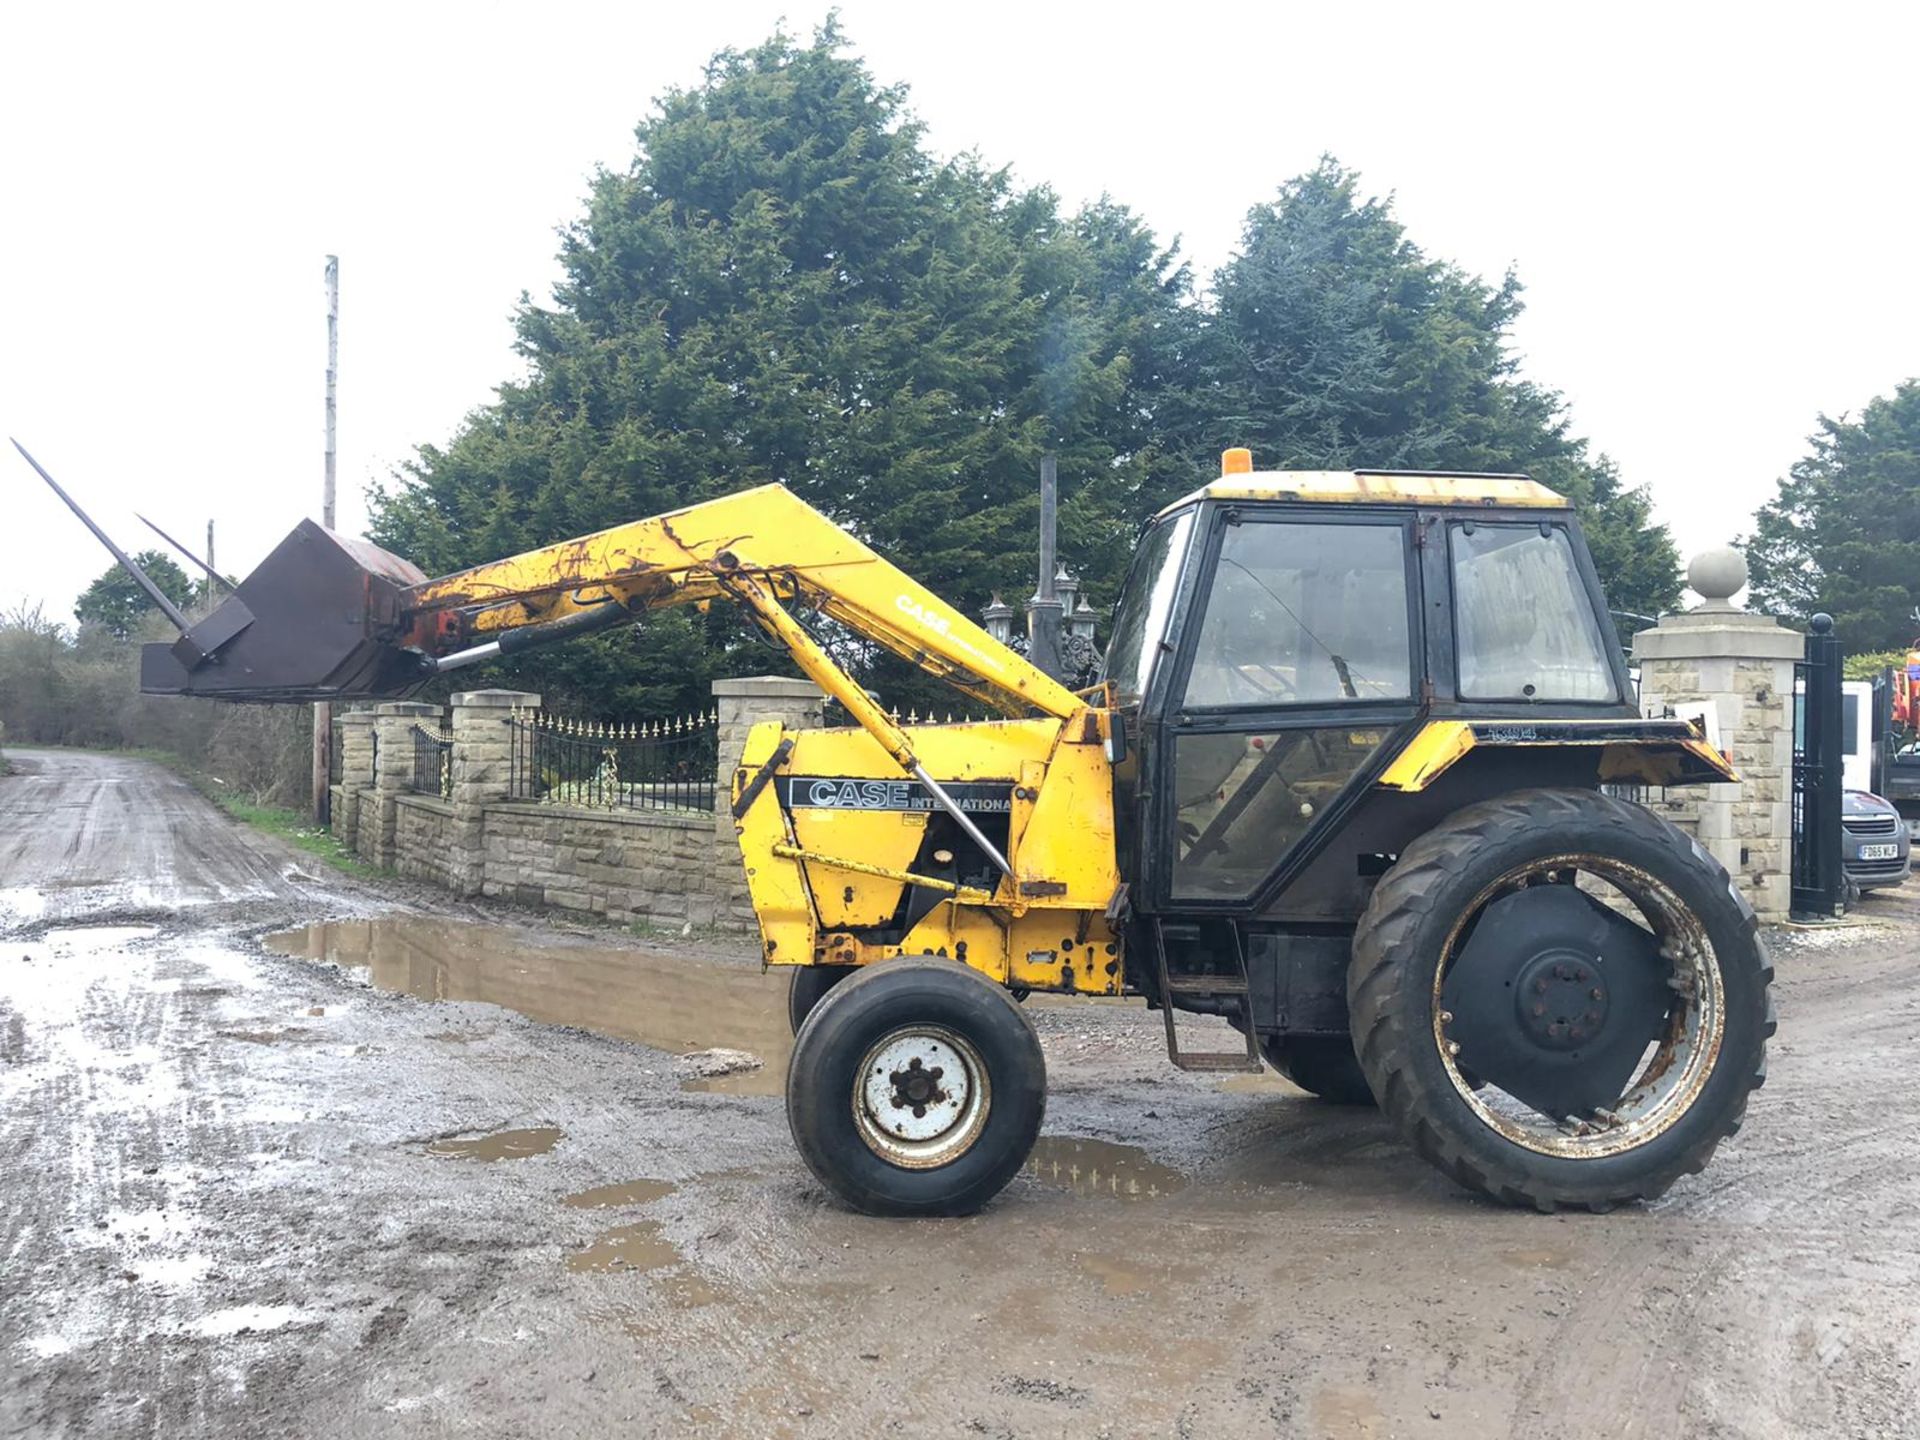 CASE INTERNATIONAL 1394 LOADER TRACTOR, RUNS AND WORKS WELL, 3 POINT LINKAGE, PTO WORKING, 774 HOURS - Image 2 of 8